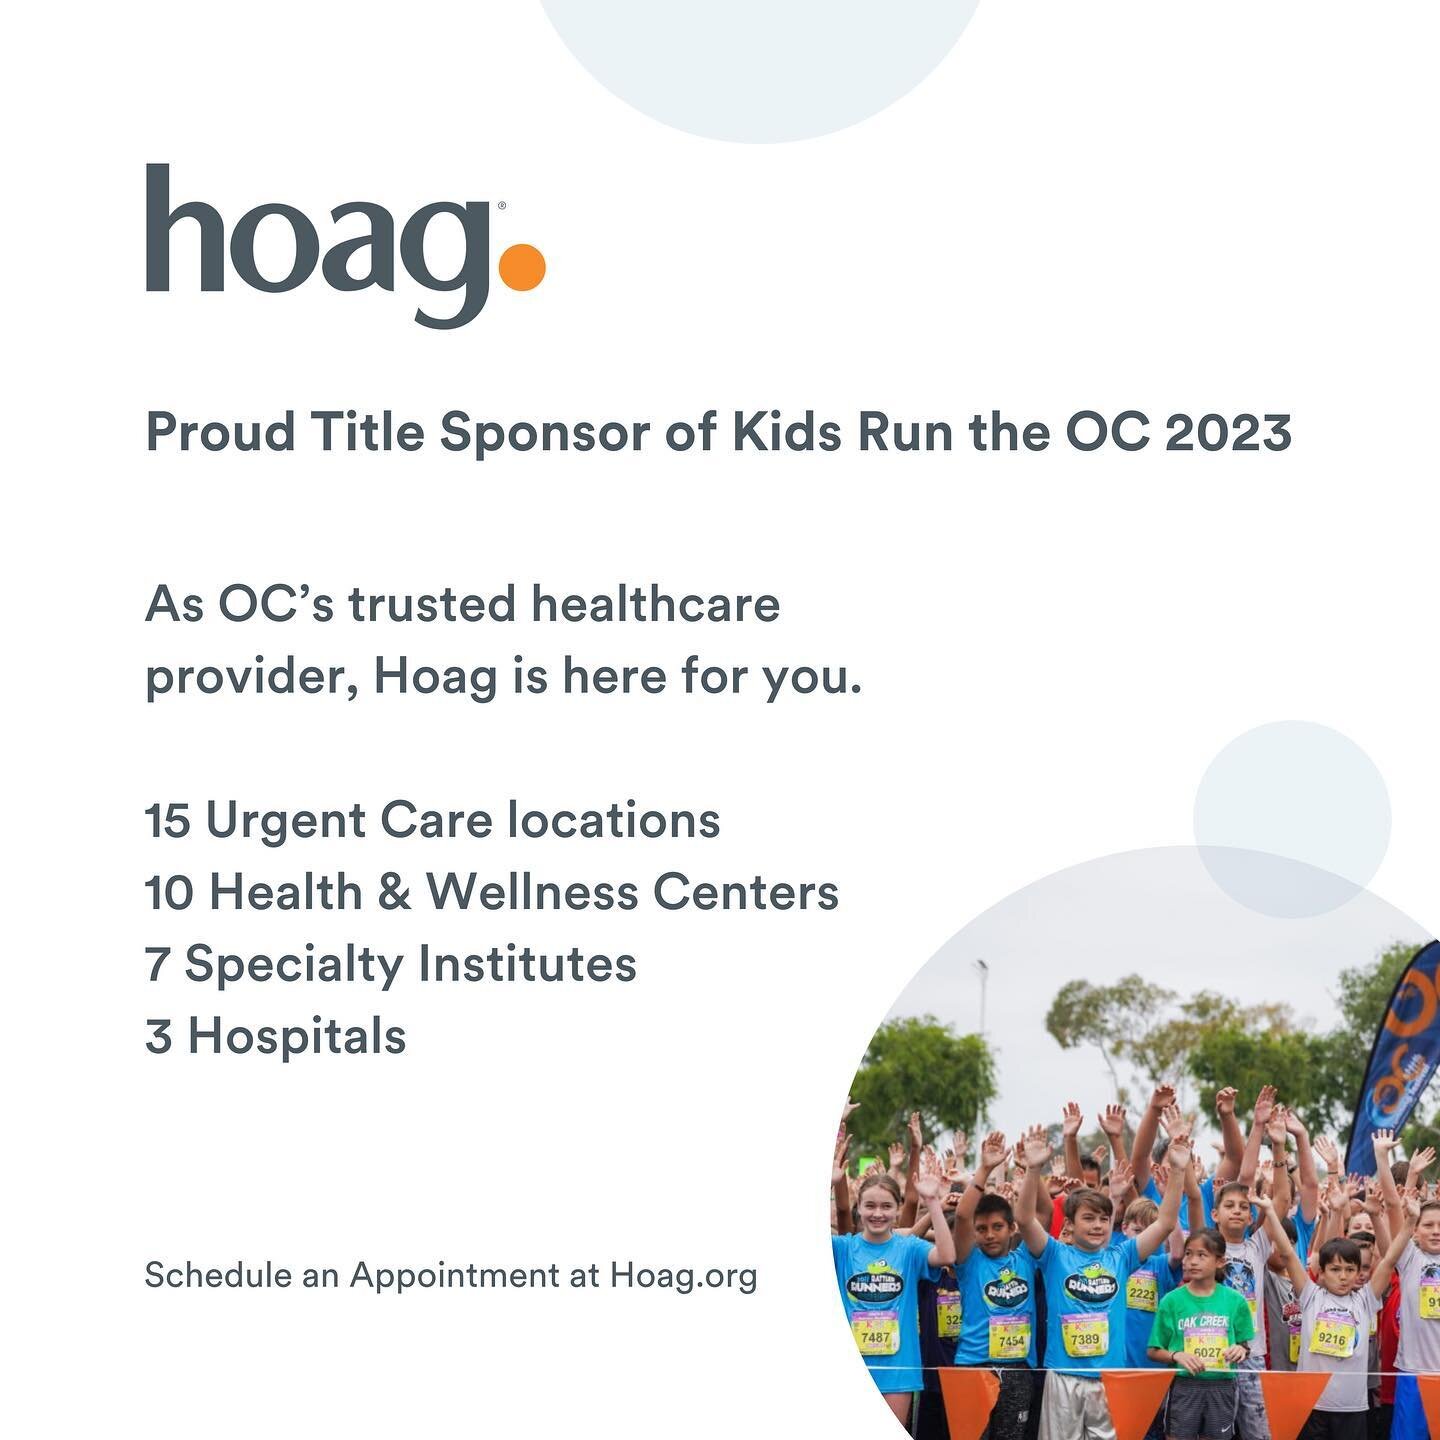 We are excited to announce @Hoaghealth as the title sponsor of this year&rsquo;s Kids Run the OC!  As OC&rsquo;s trusted healthcare provider, Hoag is honored to care for you and your family at one of their 15 urgent care locations, 10 health &amp; we